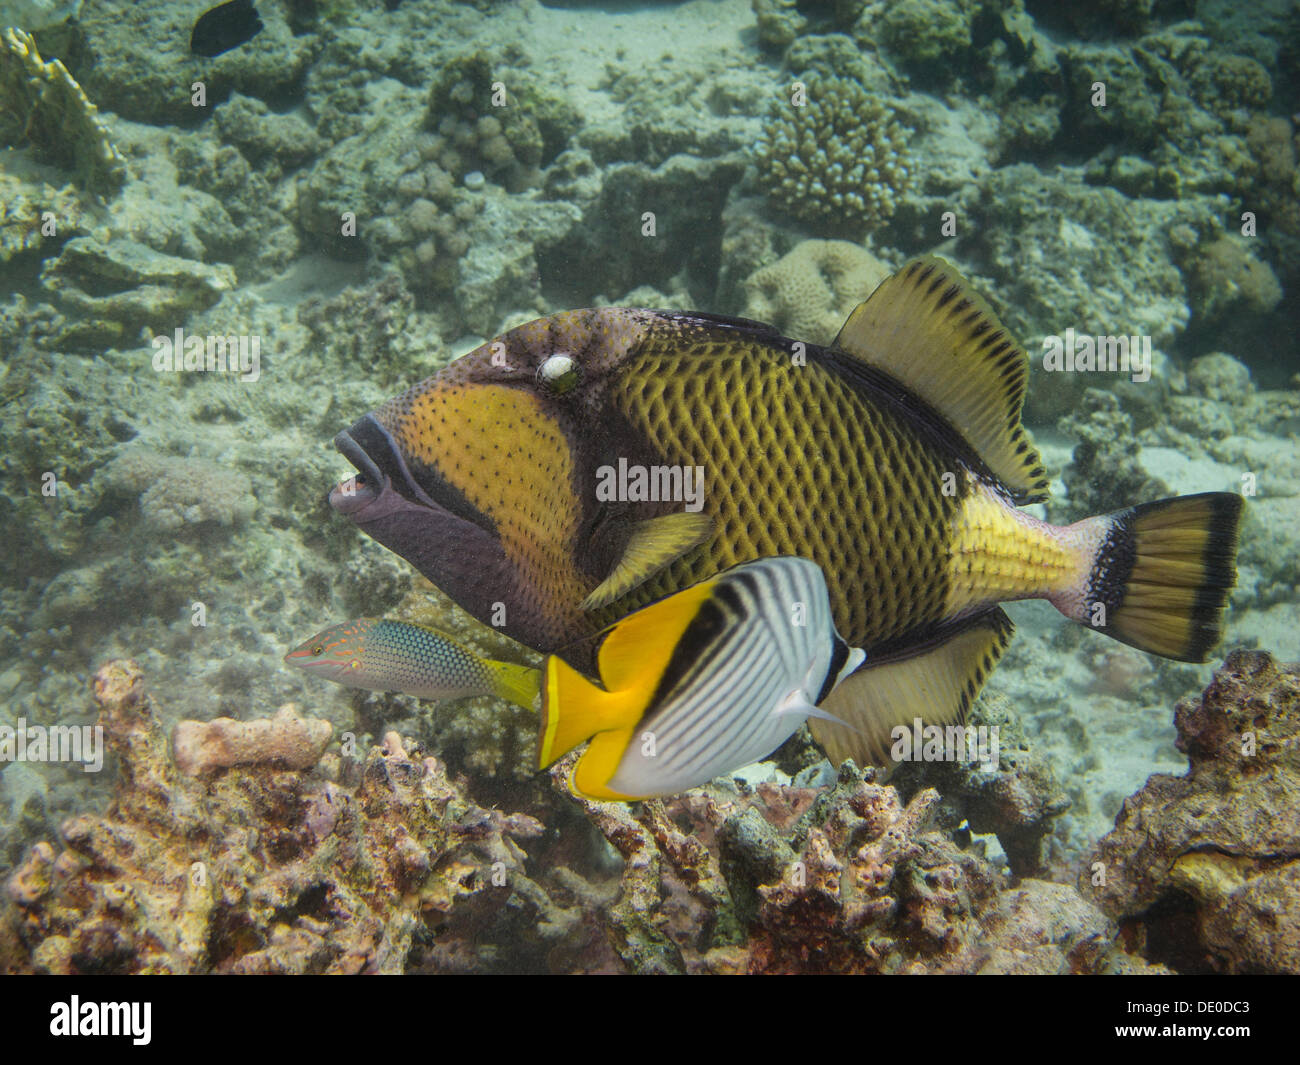 Titan Triggerfish, Giant Triggerfish or Moustache Triggerfish (Balistoides viridescens), Mangrove Bay, Red Sea, Egypt, Africa Stock Photo